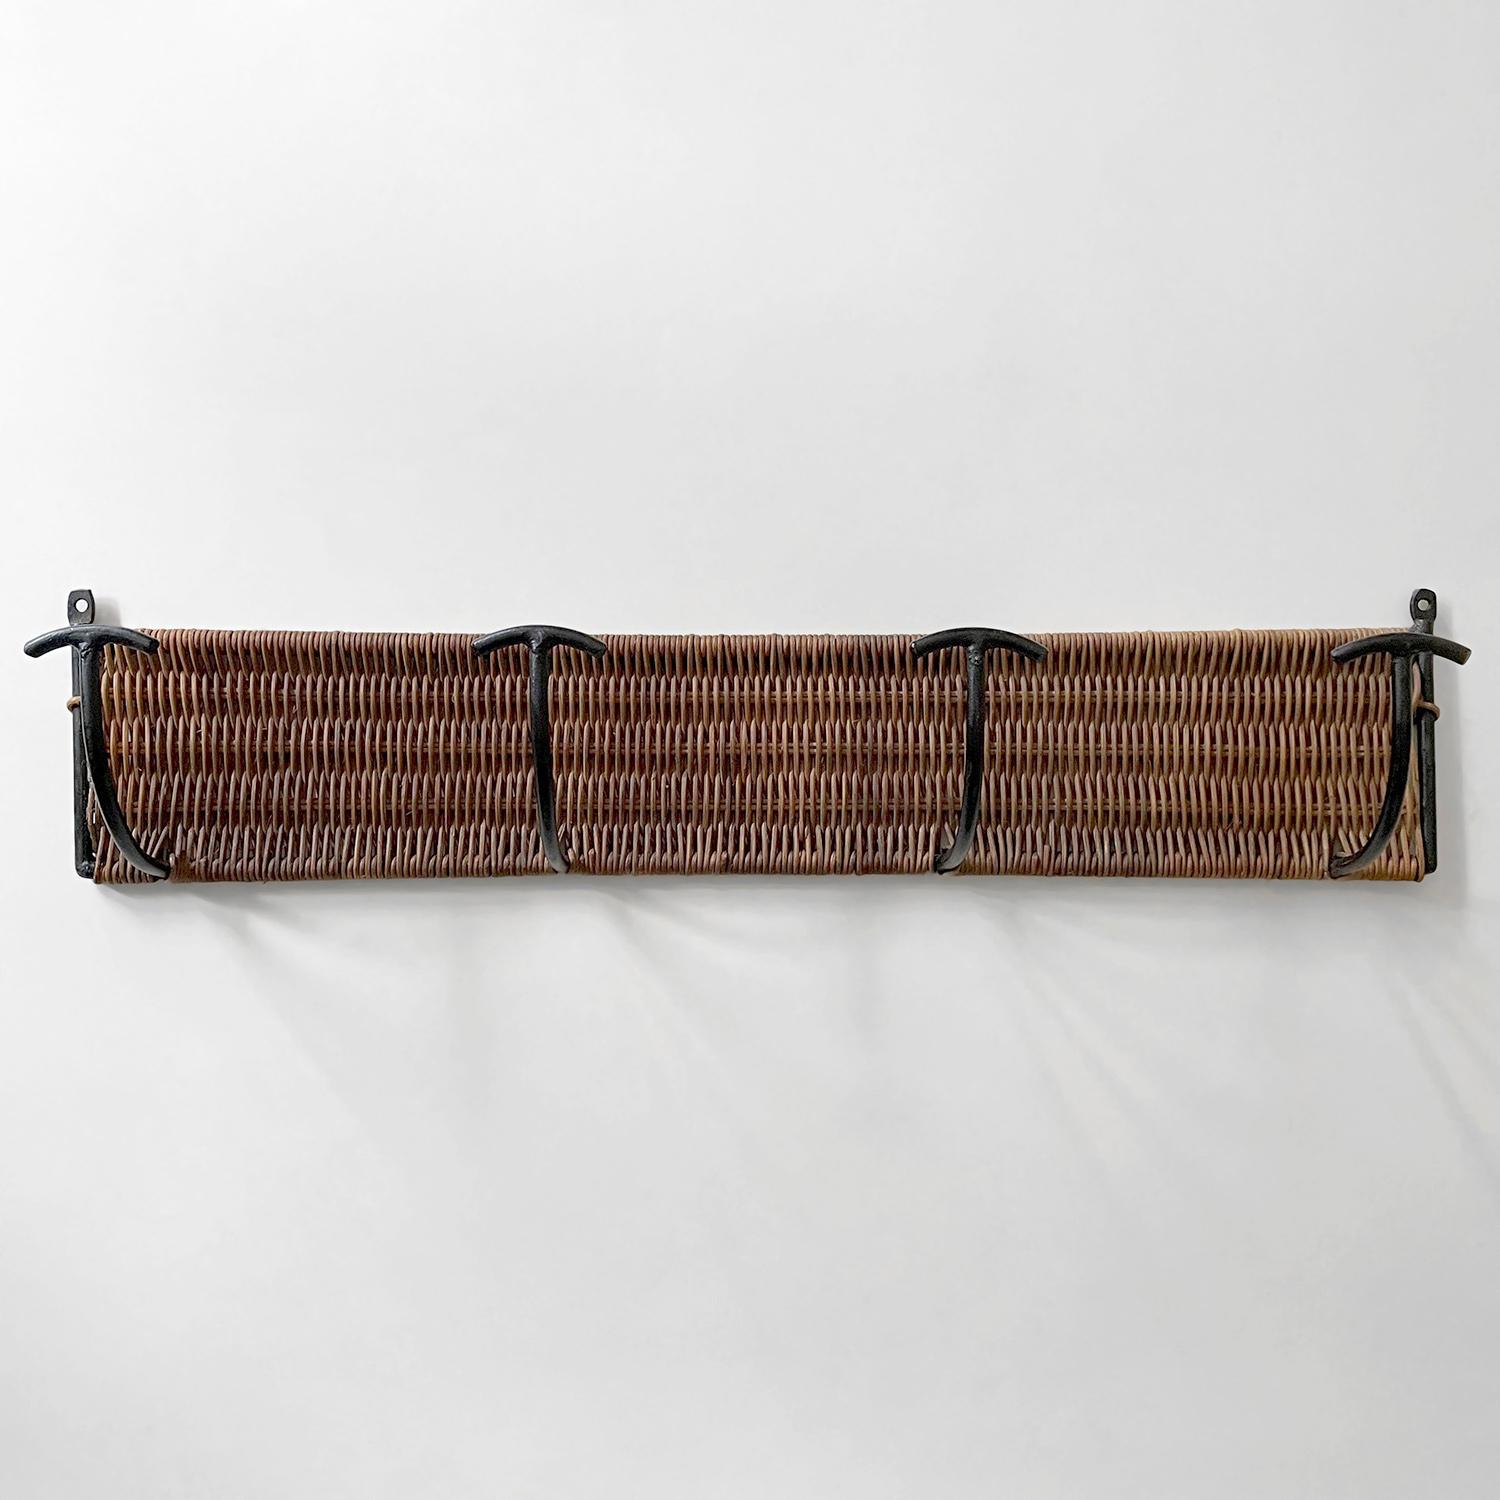 French wicker and iron wall hook
France, circa 1950’s
Wicker intricately woven around solid iron frame
Natural color variations
Beautiful form and function
Patina from age and use
Last photo is for reference only
We have a large selection of antique